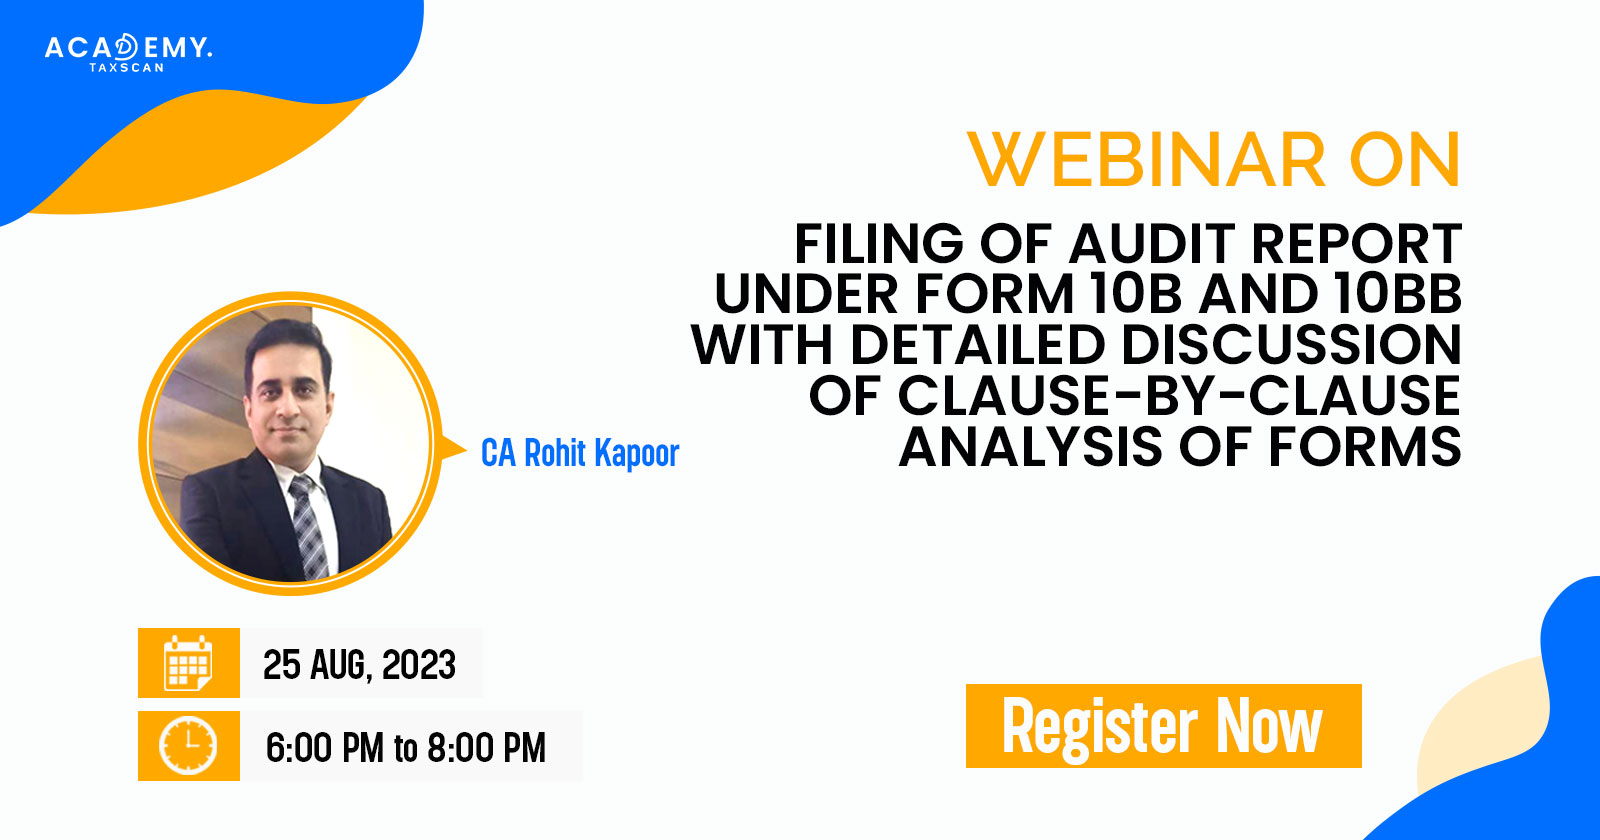 Webinar -Filing of Audit Report - Audit Report - Form 10B - Detailed Discussion of Clause-by-Clause Analysis of Forms - Online Certificate Course - Certificate Course - Taxscan Academy